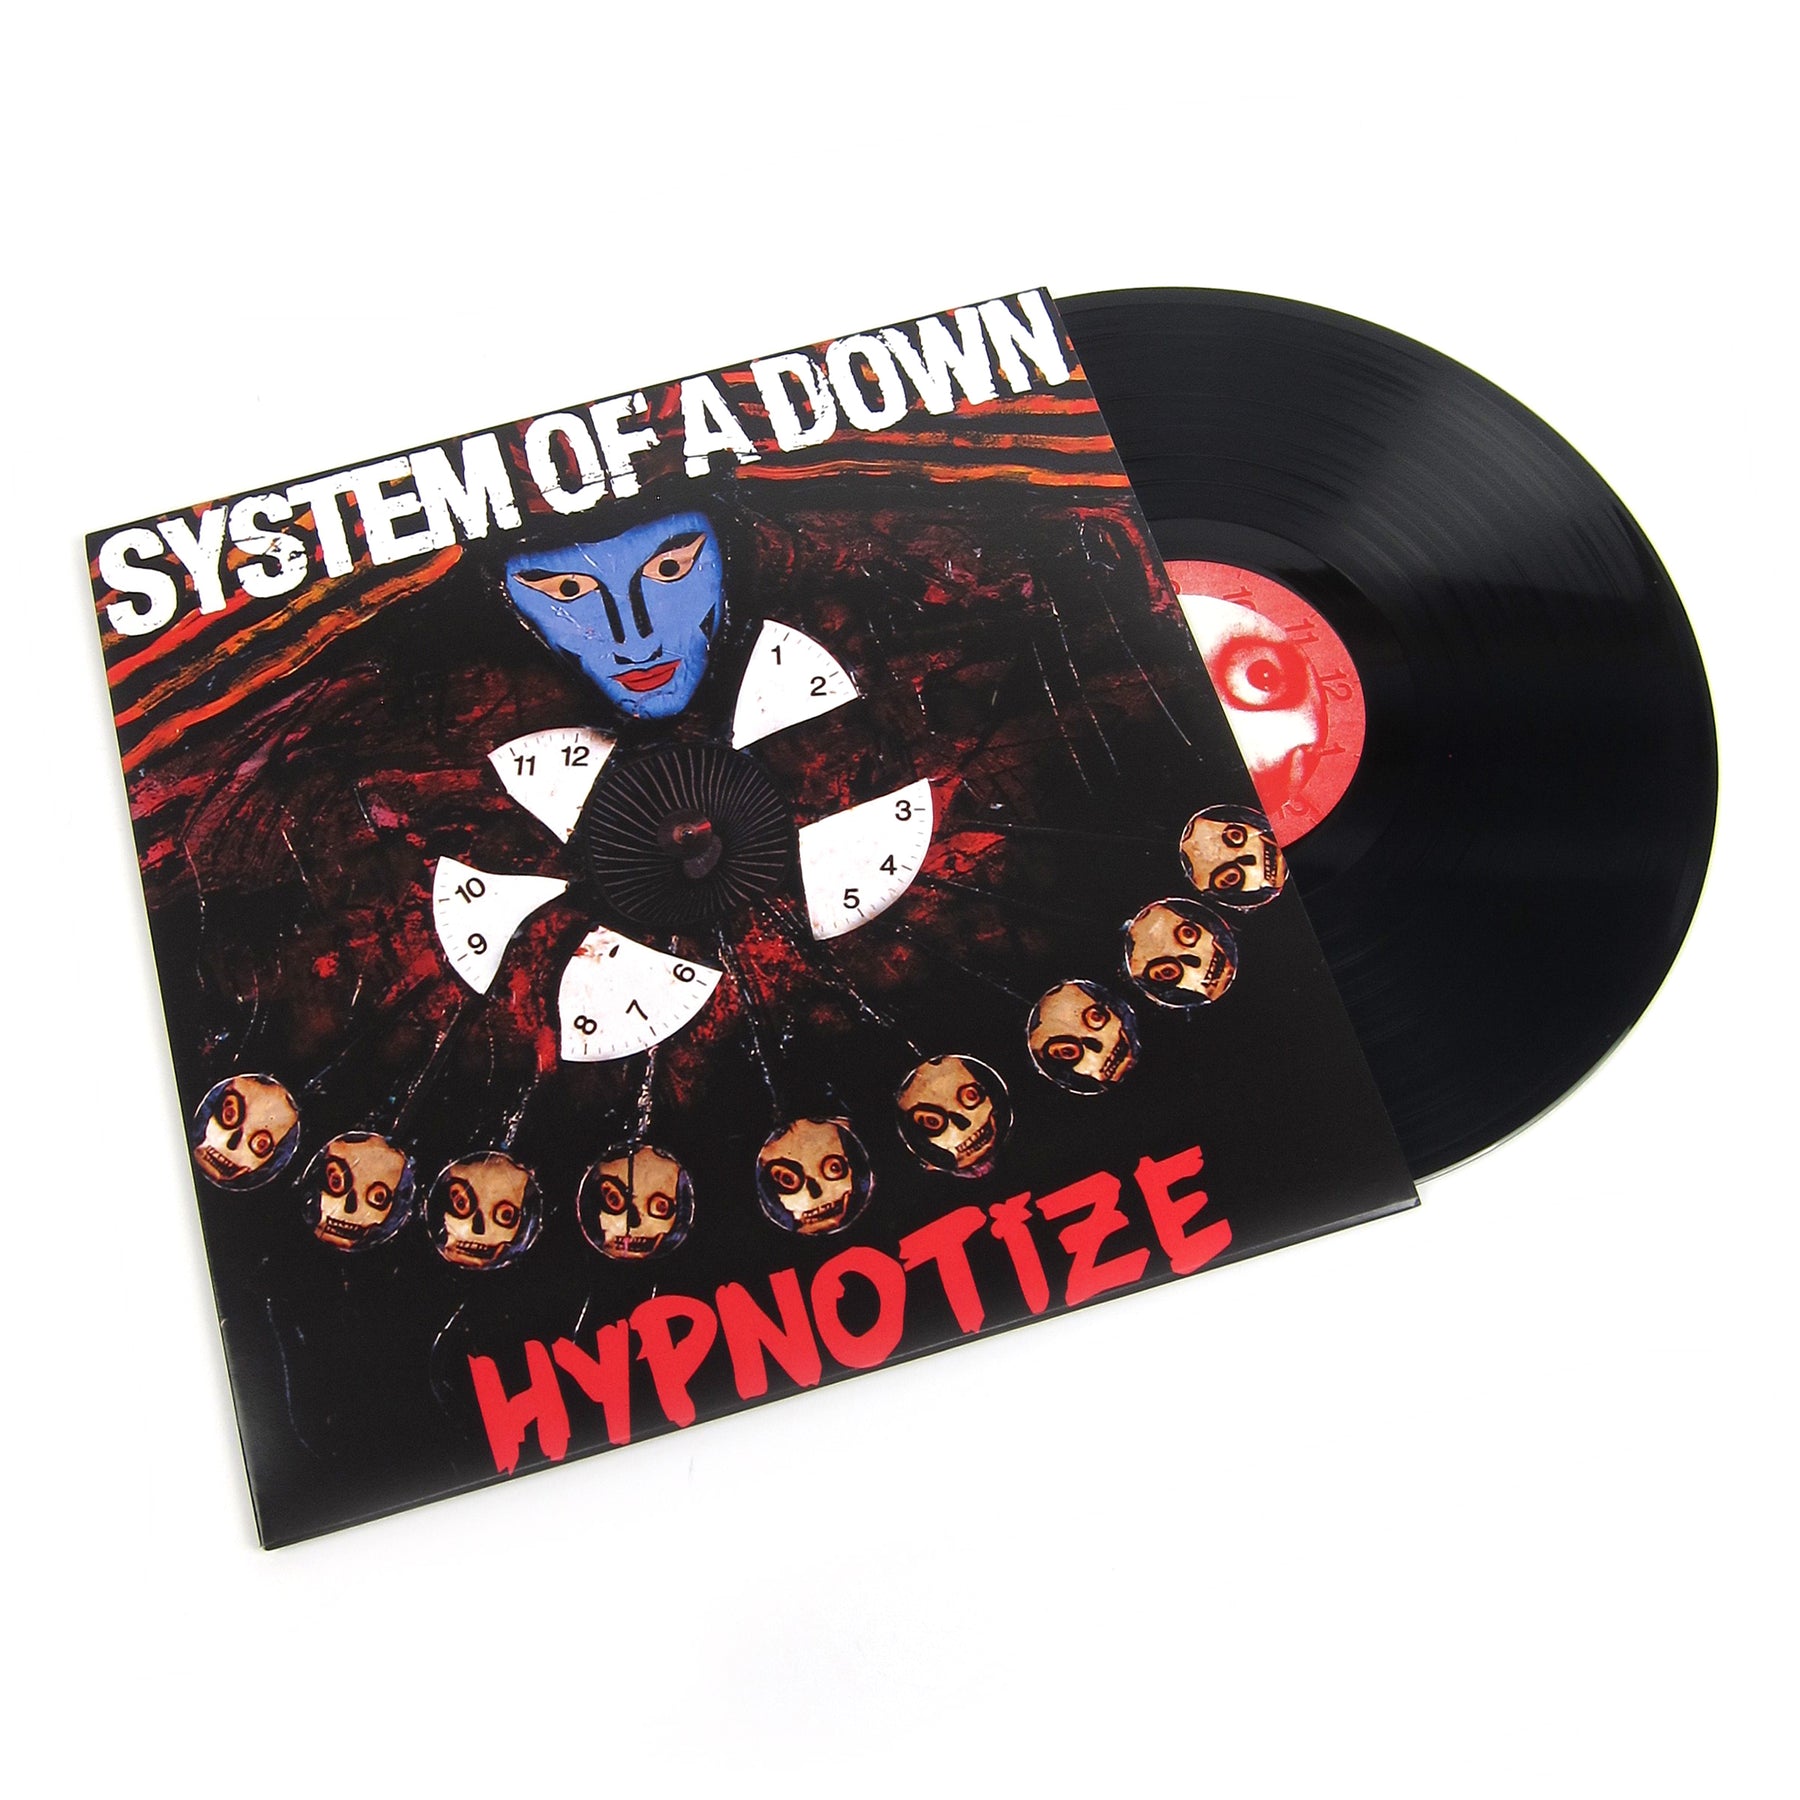 download hypnotize system of a down mp3